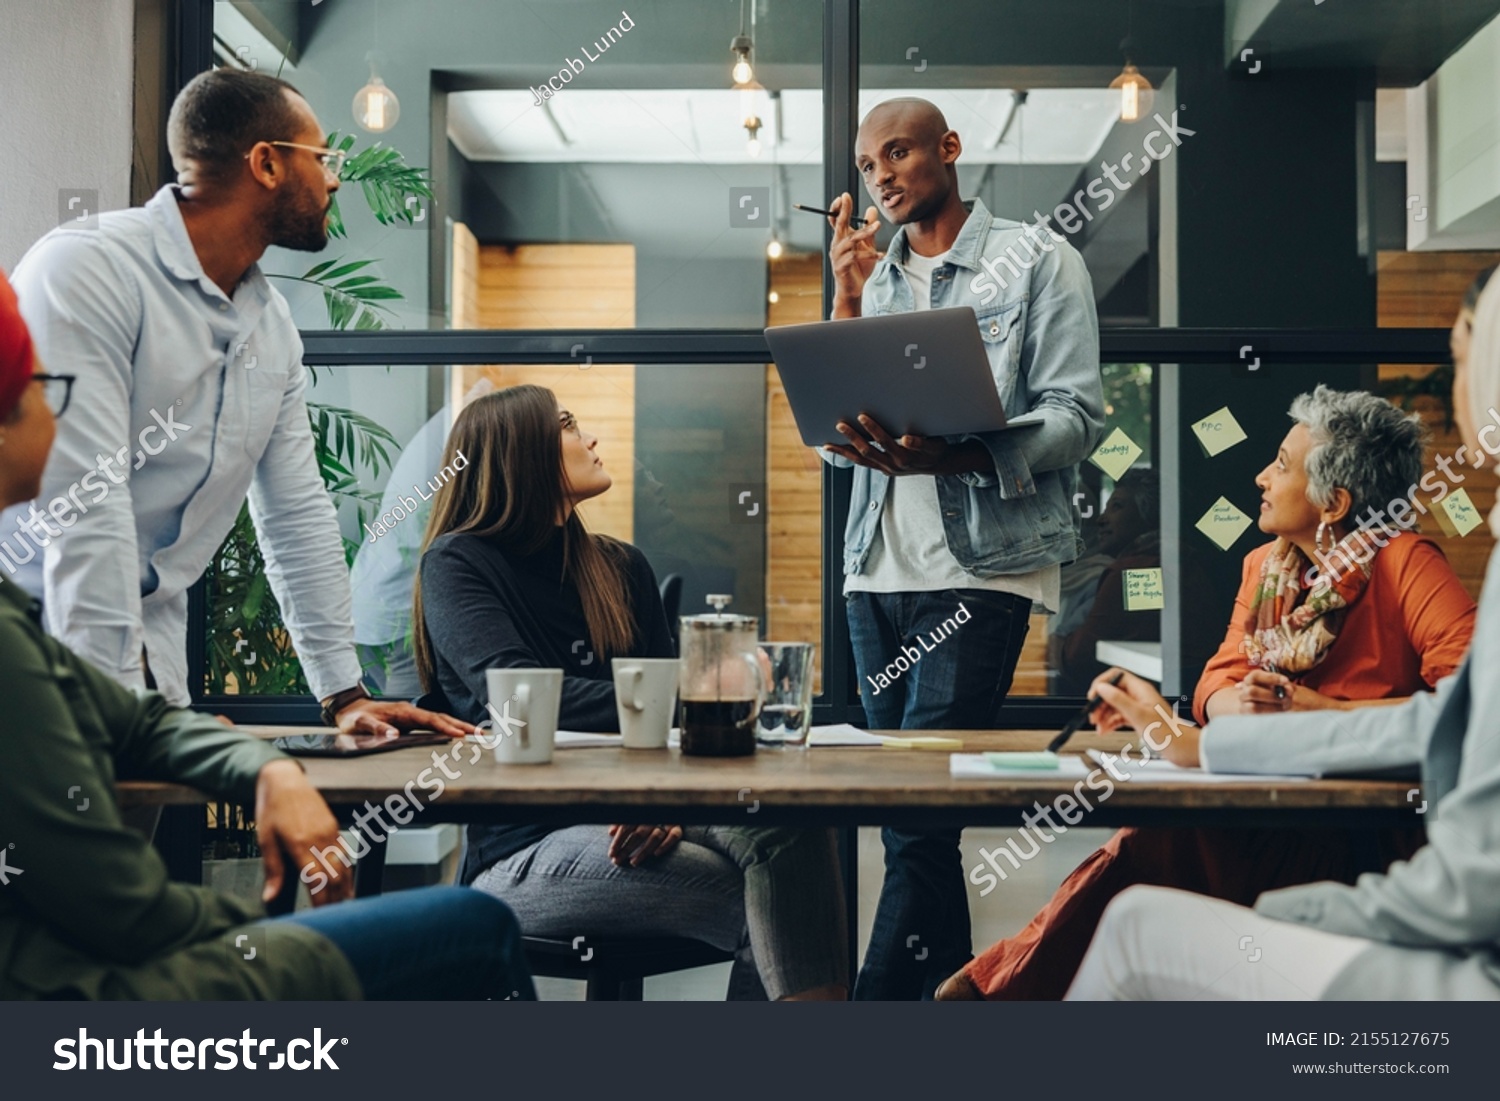 Diverse business professionals having a discussion during a meeting in a modern office. Team of multicultural businesspeople sharing creative ideas in an inclusive workplace. #2155127675